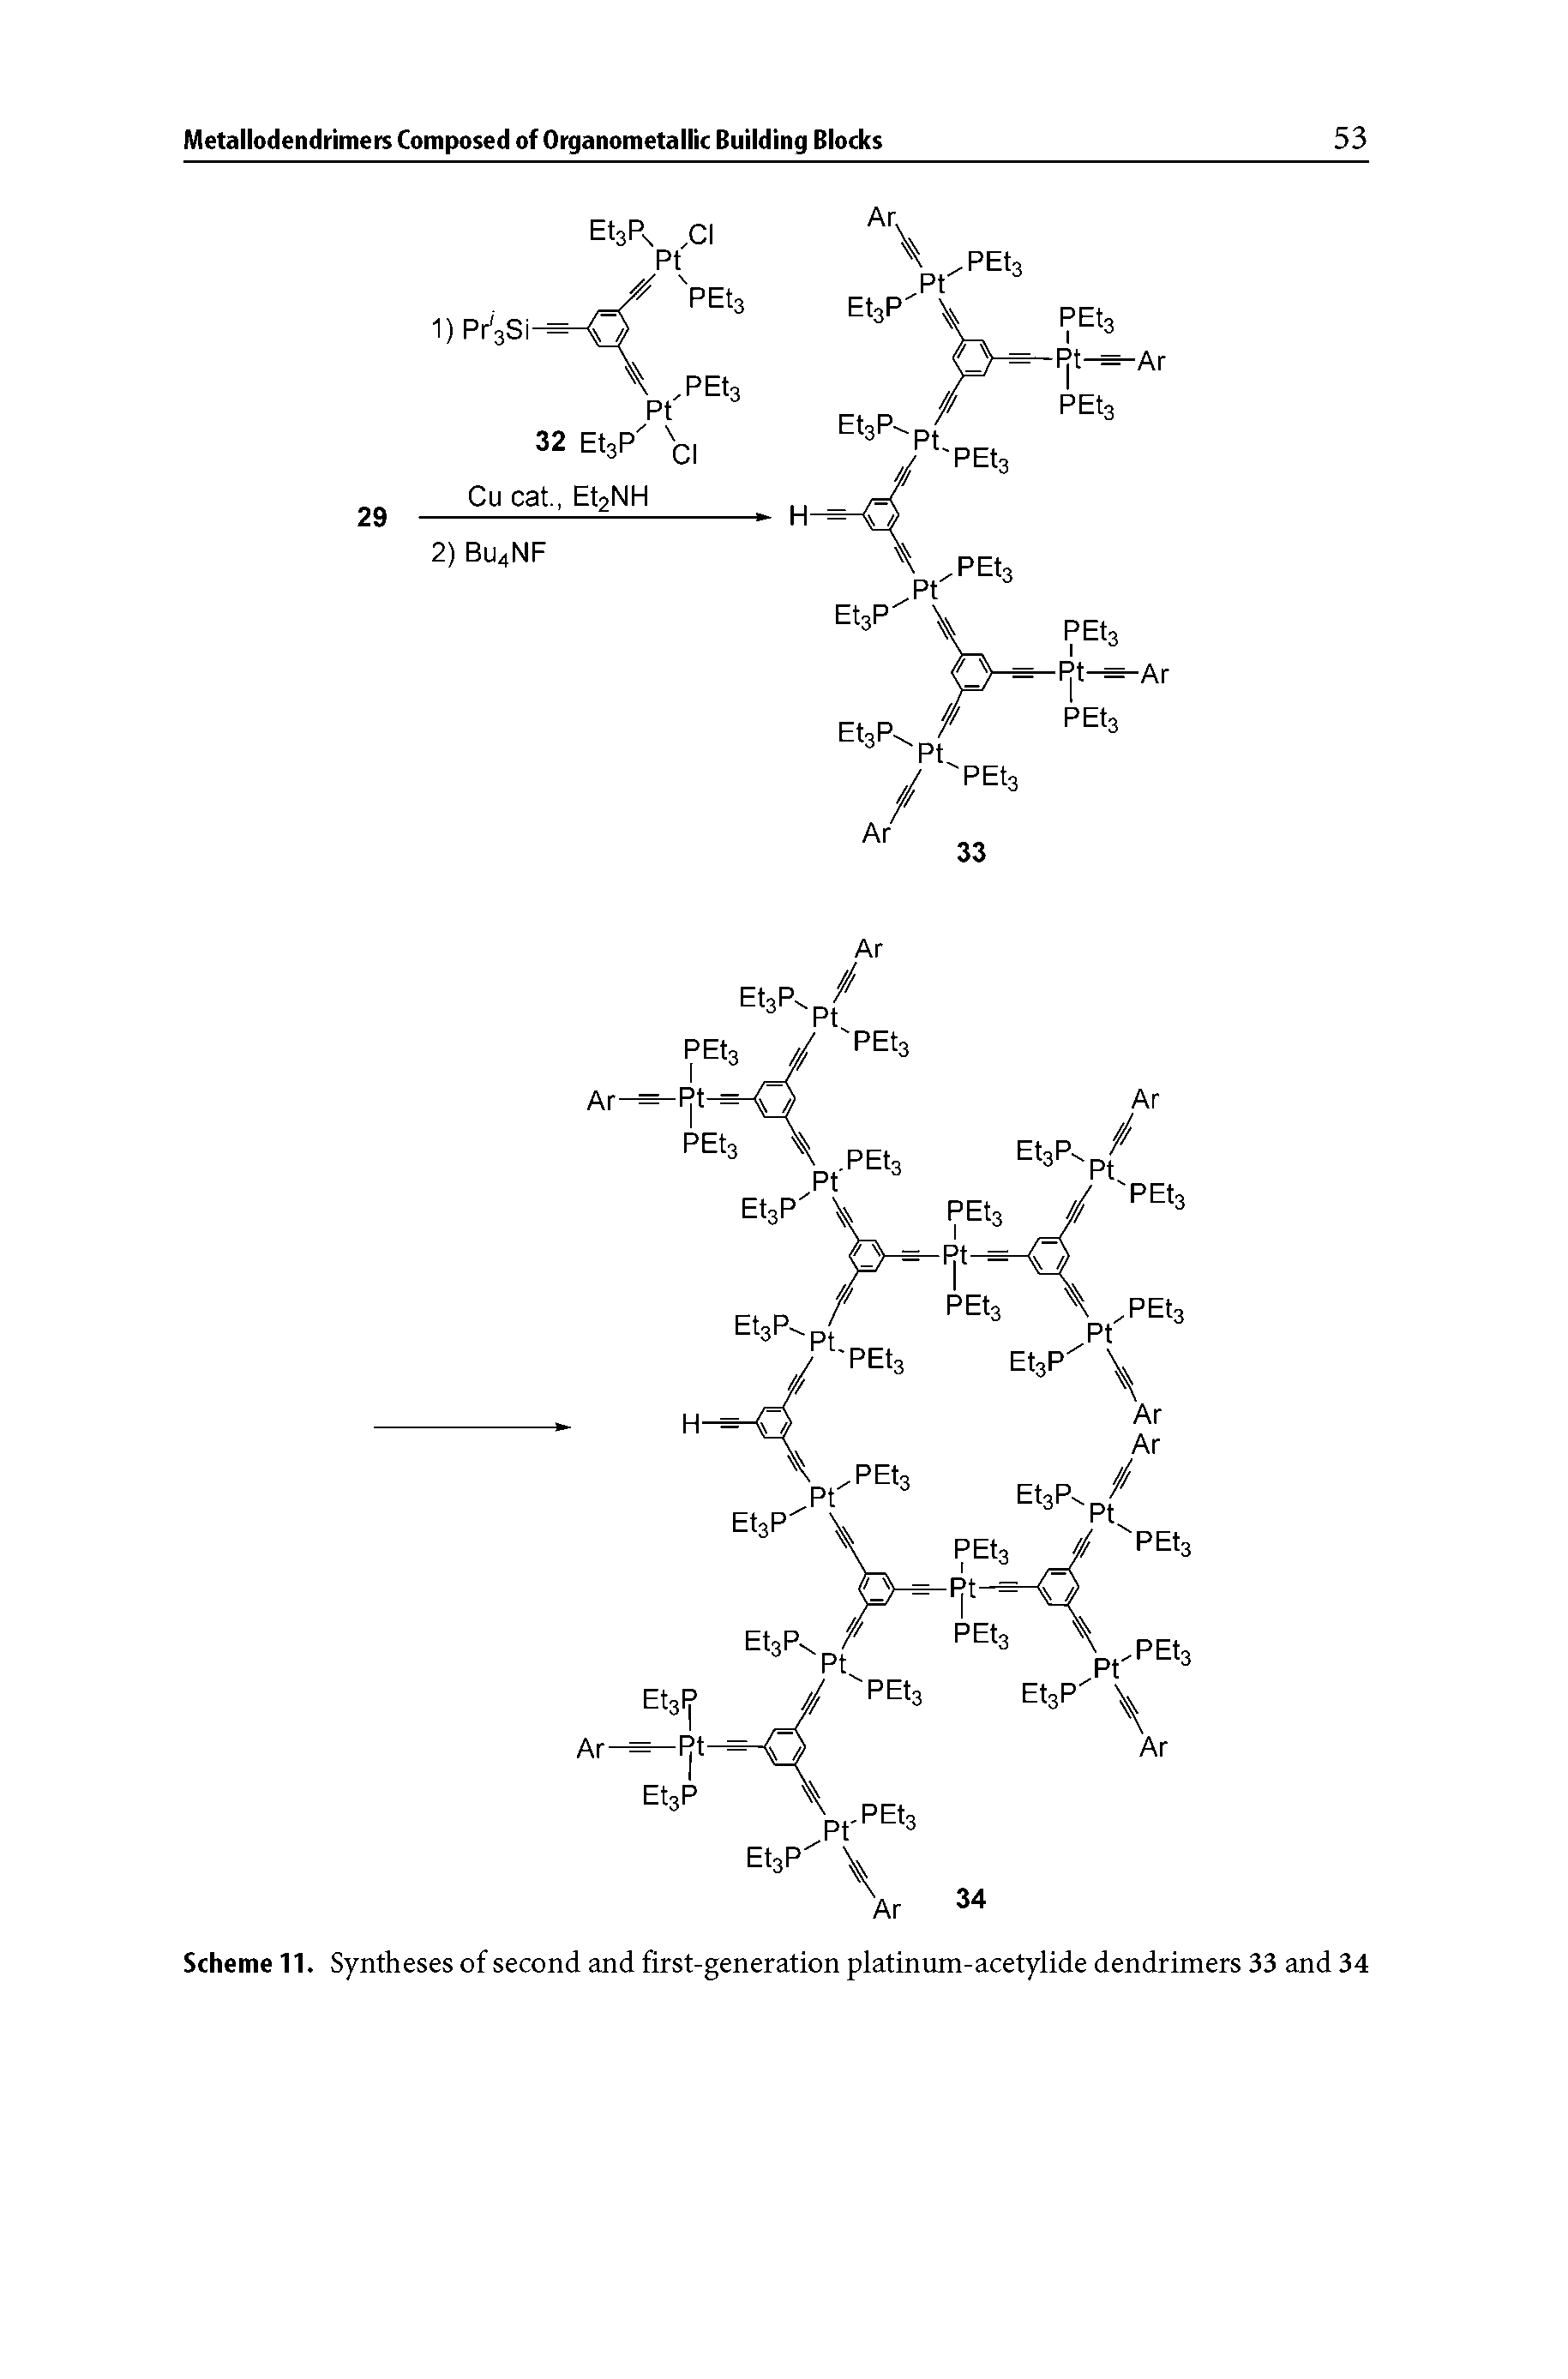 Scheme 11. Syntheses of second and first-generation platinum-acetylide dendrimers 33 and 34...